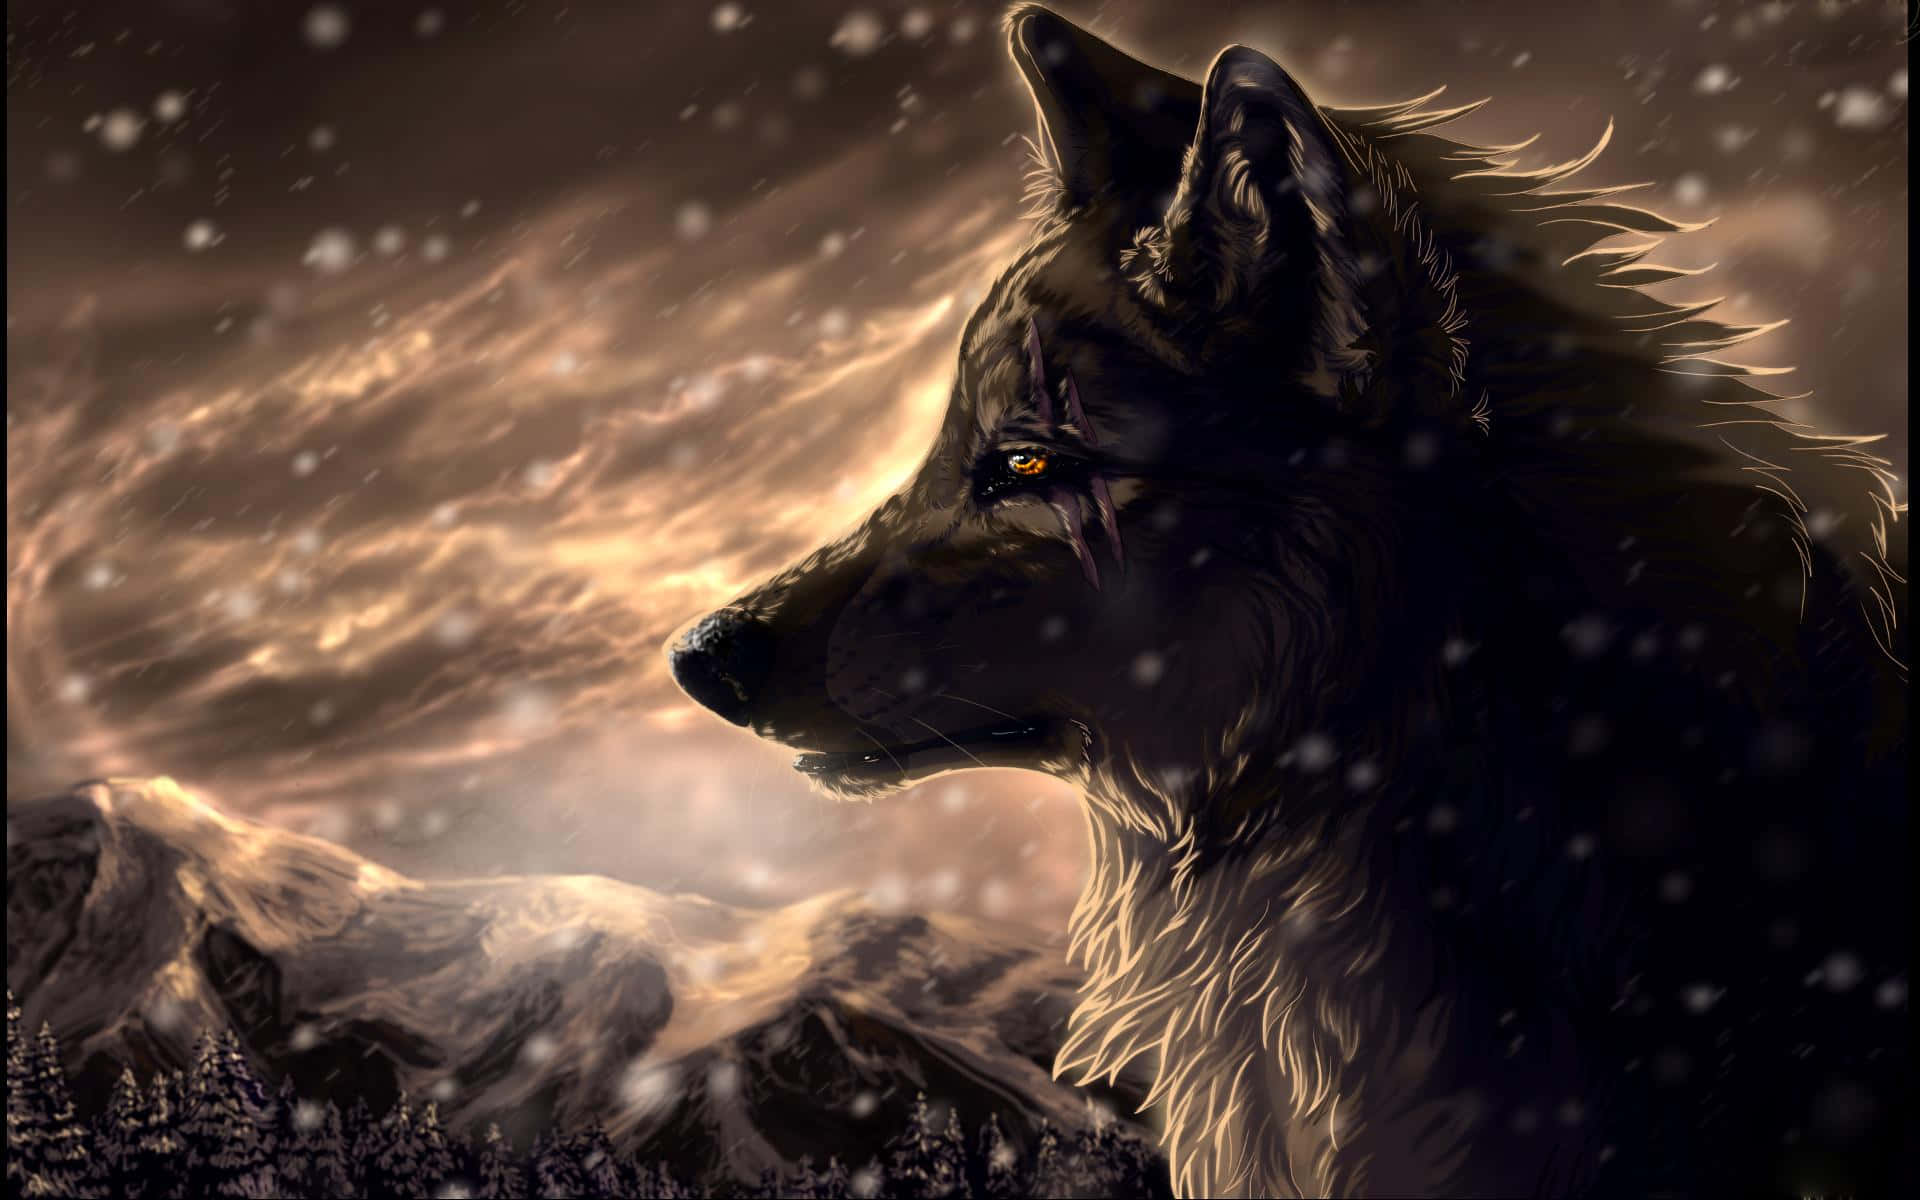 "The majestic Epic Wolf" Wallpaper